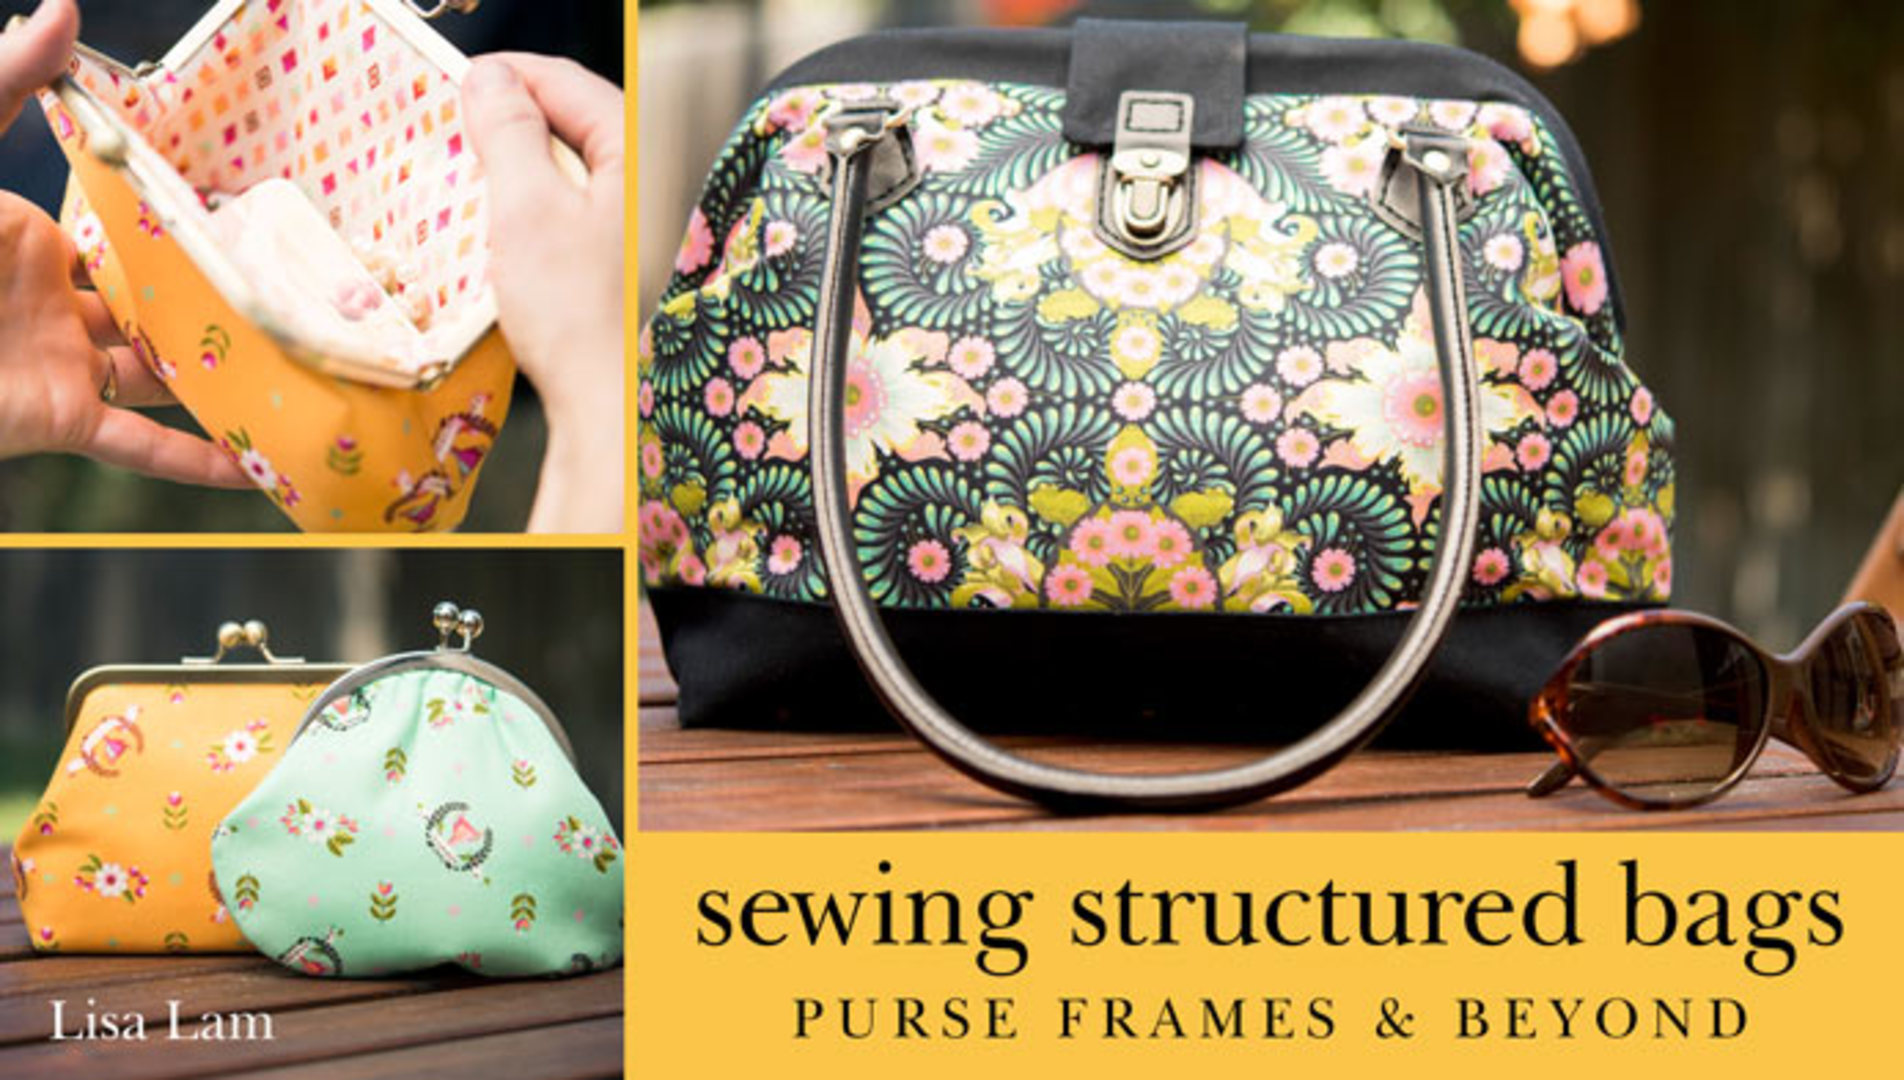 How to sew a coin purse with a sew-in purse frame